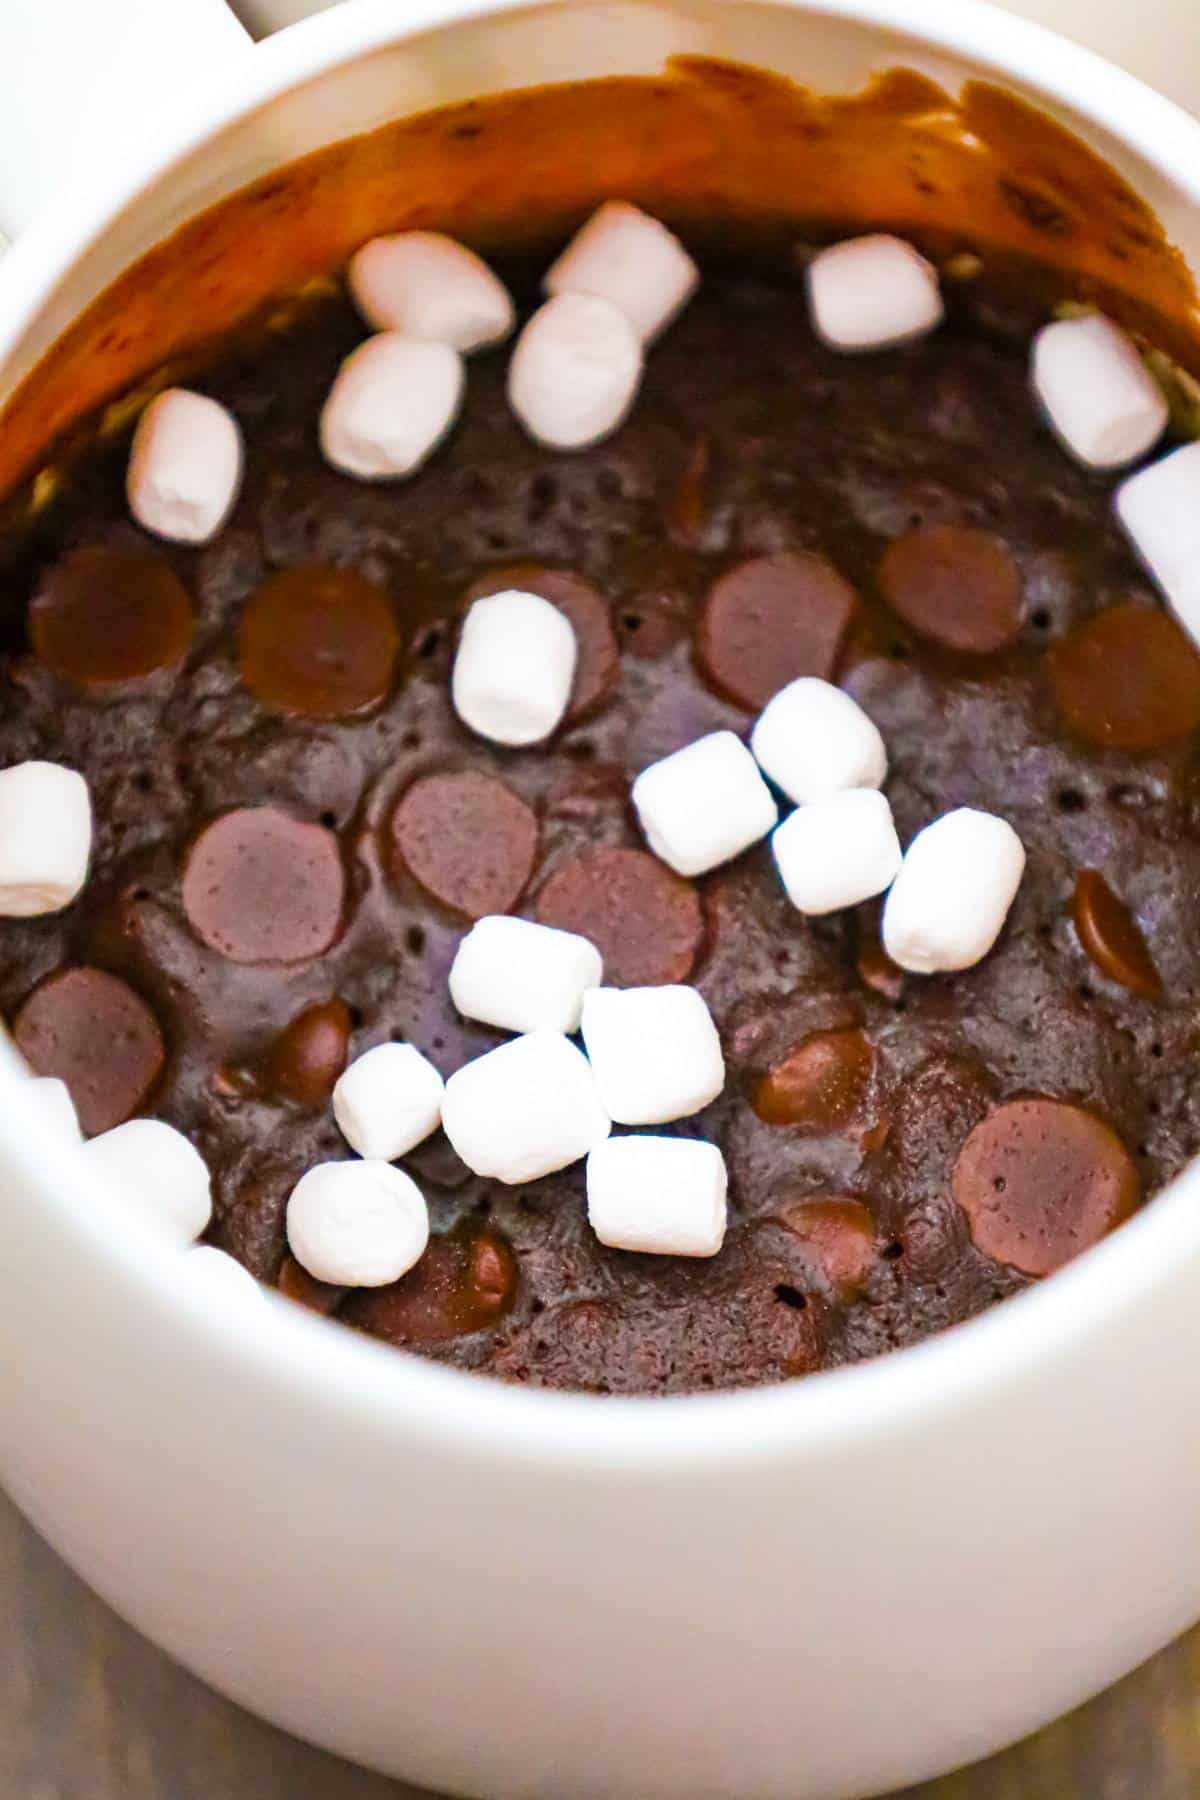 Brownie in a Mug is a simple but decadent single serve dessert recipe made in the microwave.